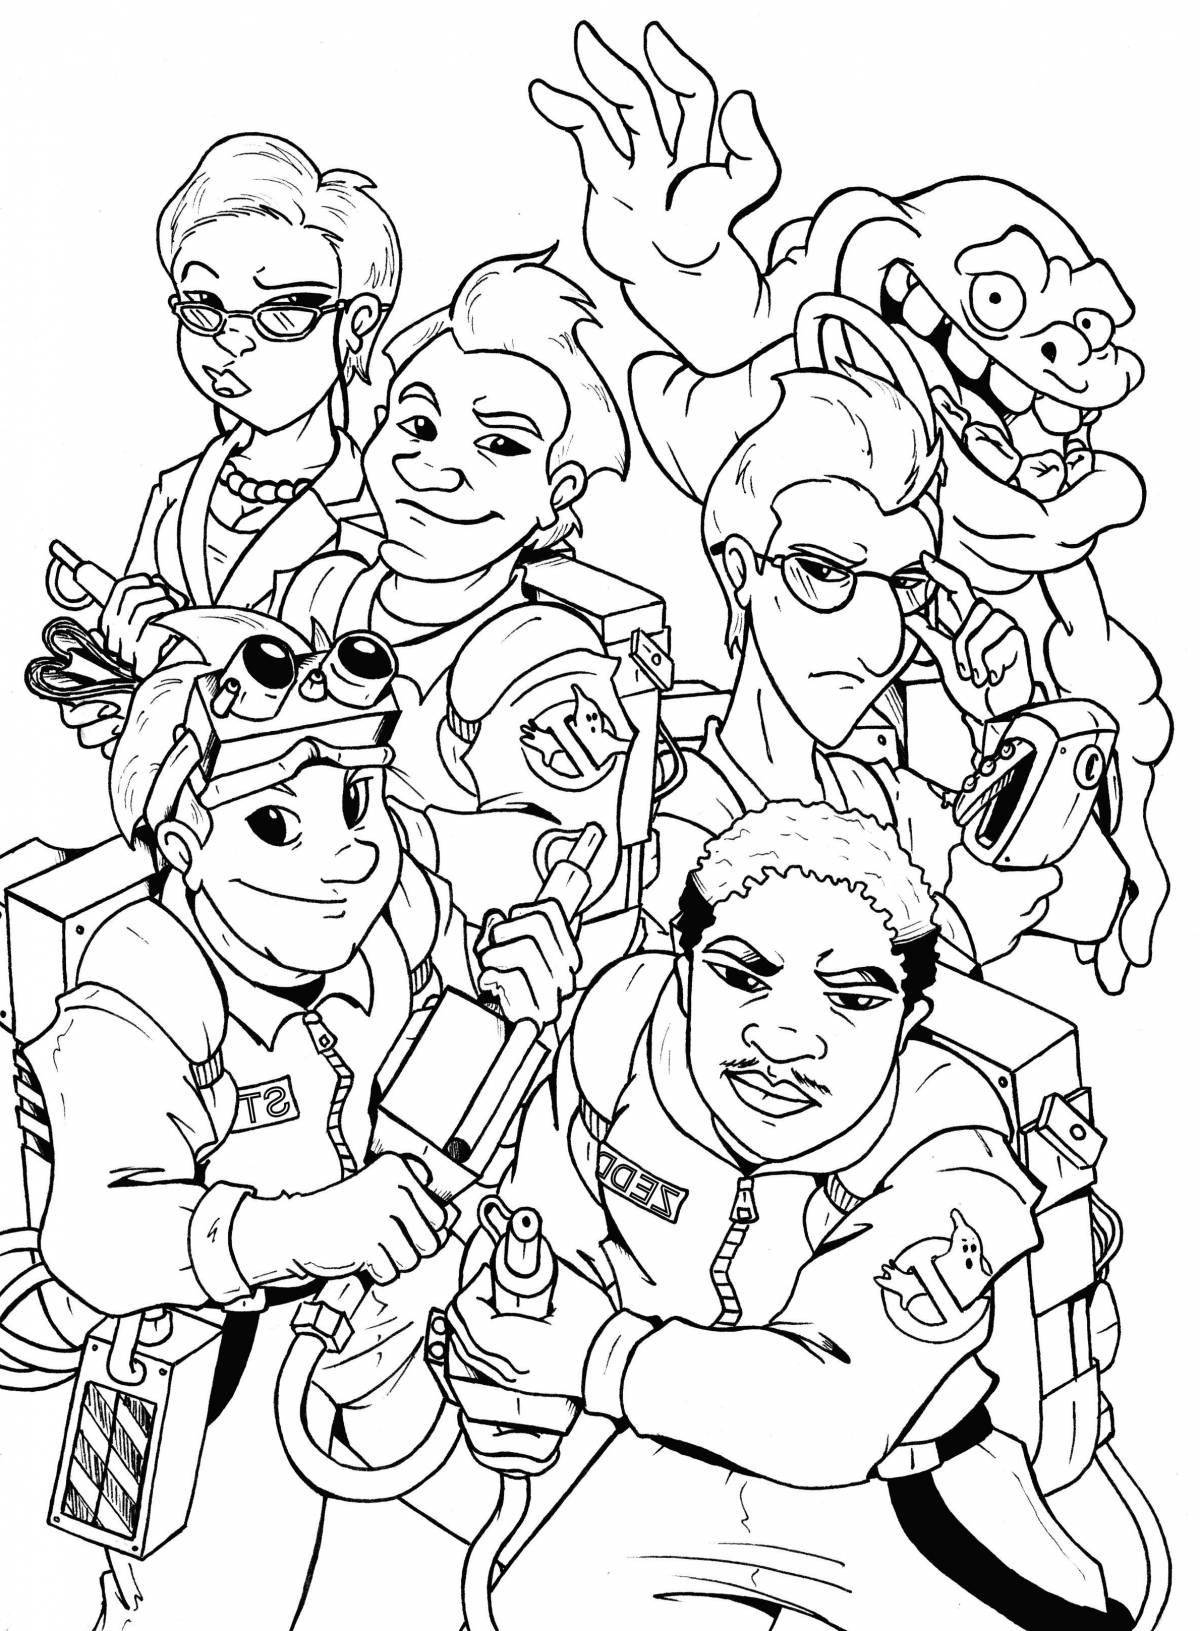 Playful ghostbusters coloring page